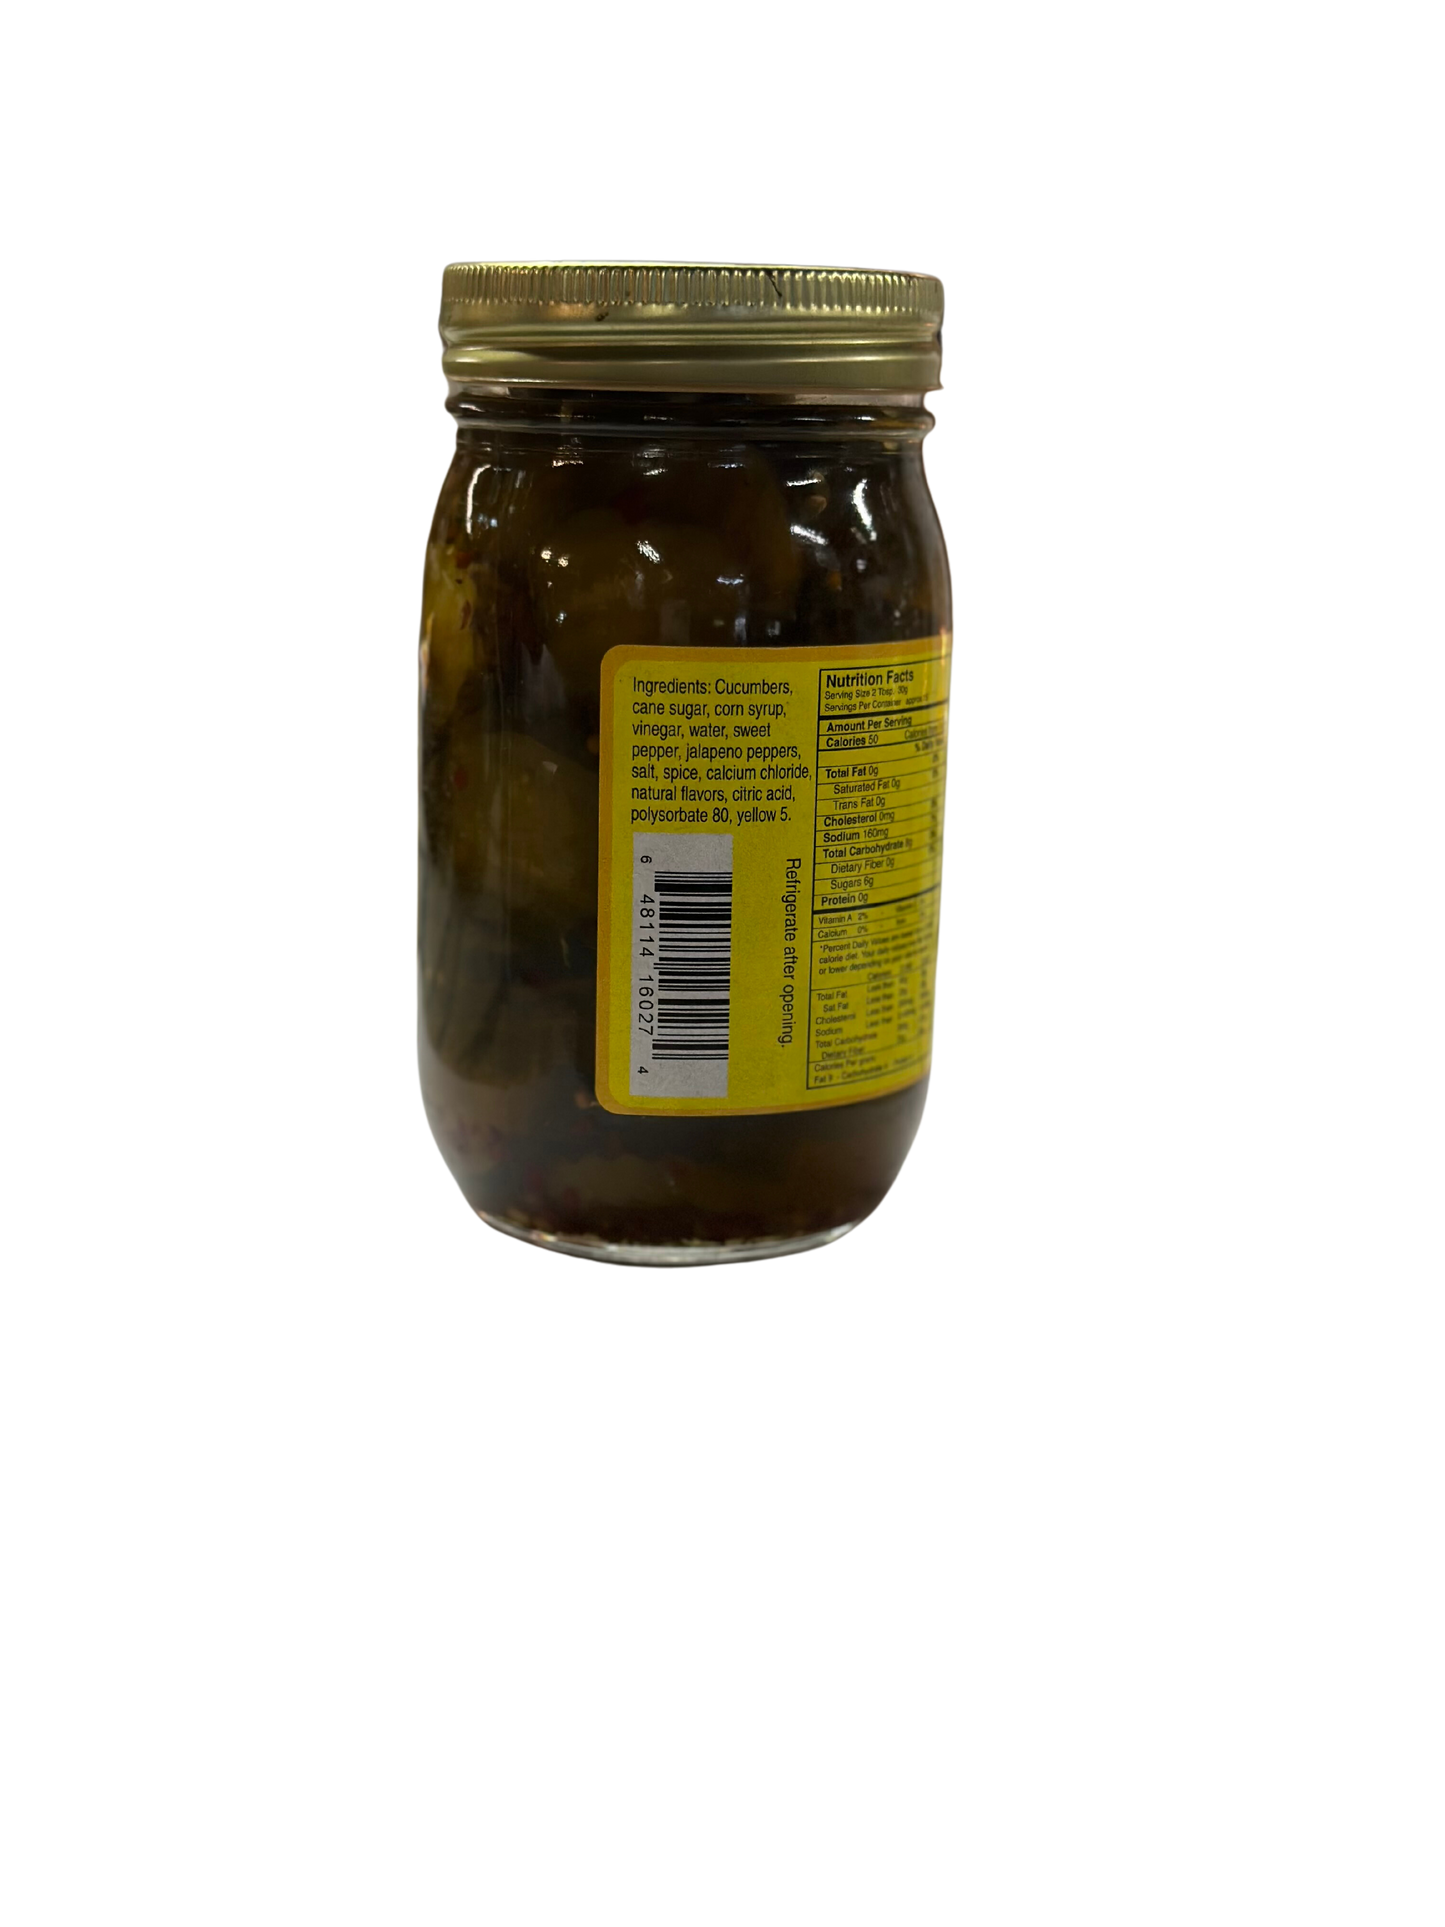 Spring Valley Farms Hot-Sweet Bread & Butter Pickles